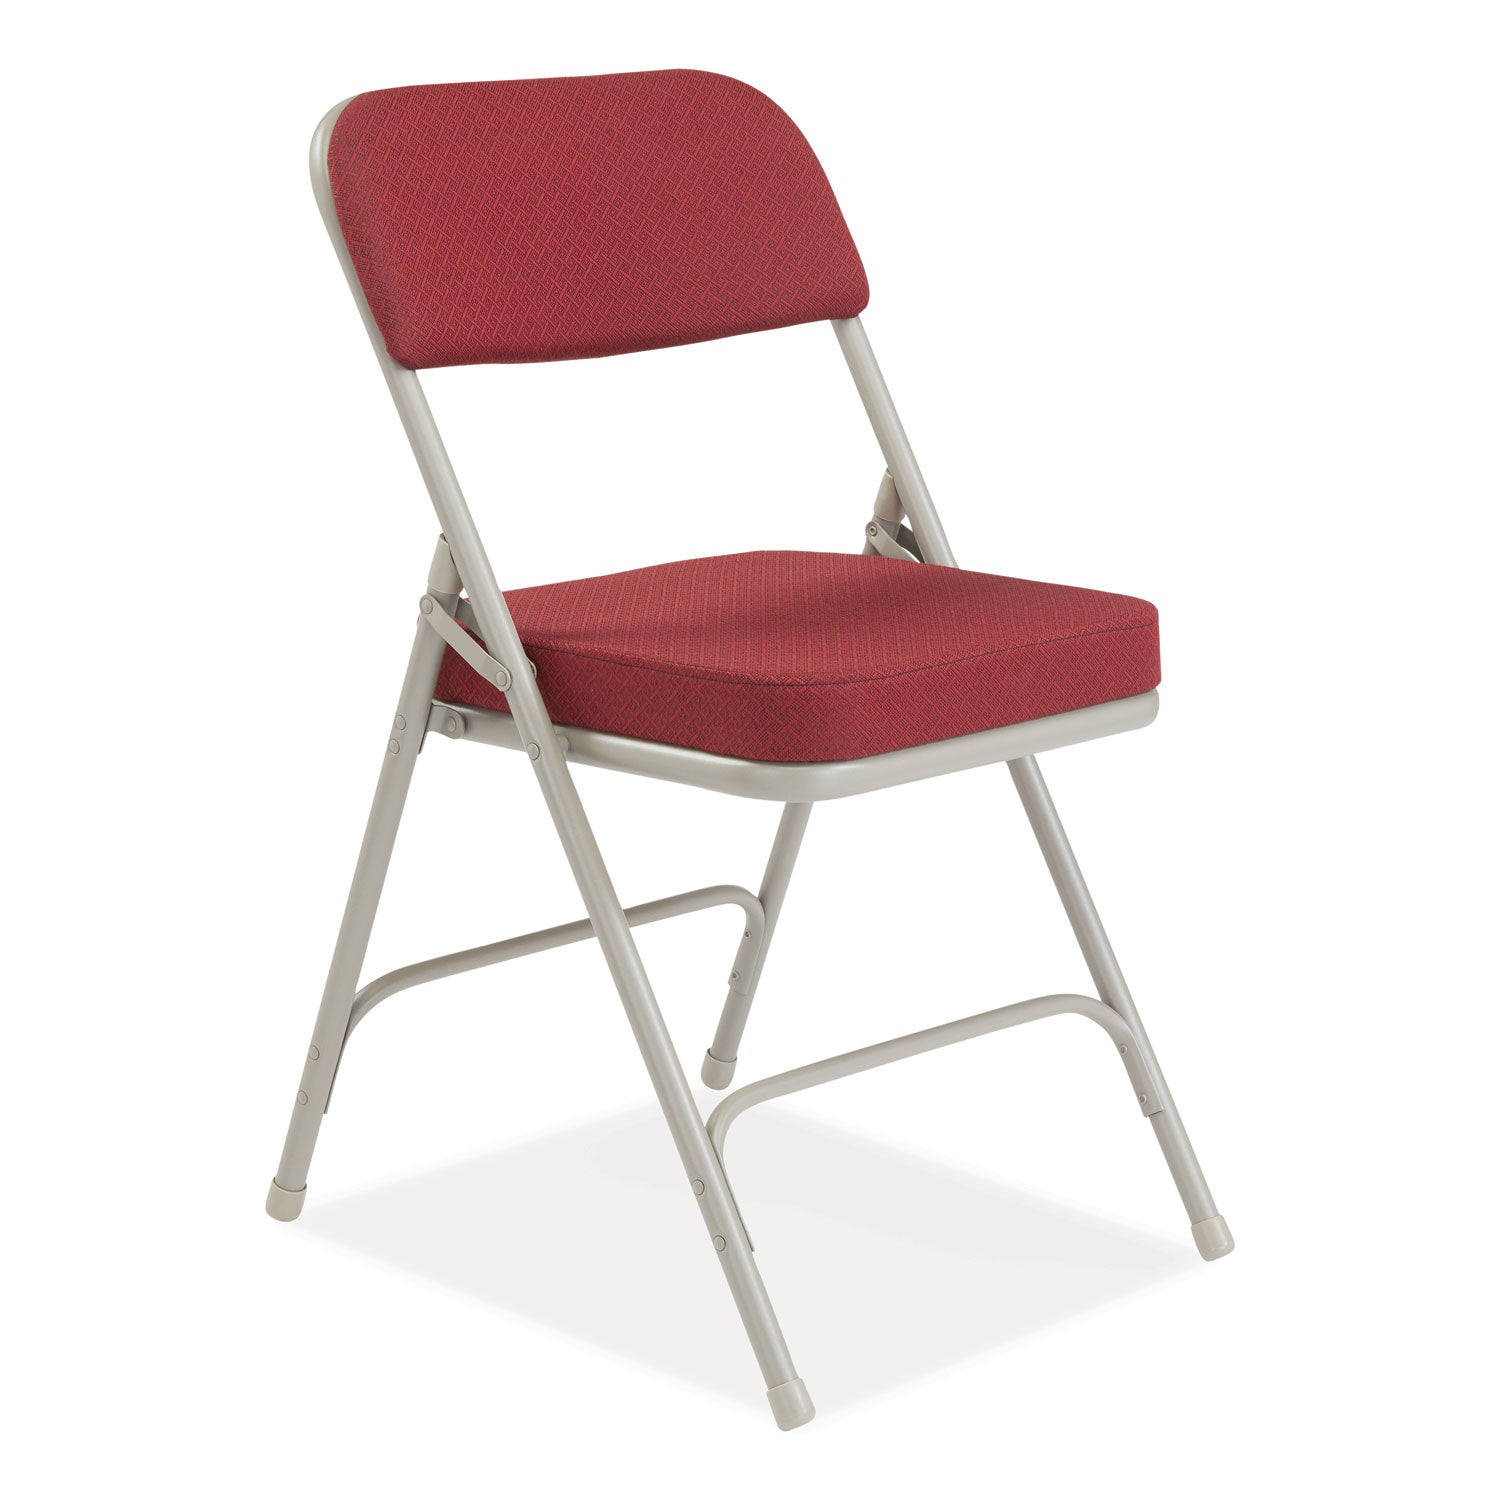 3200-series-premium-fabric-dual-hinge-folding-chair-supports-300lb-burgundy-seat-back-gray-base2-ctships-in-1-3-bus-days_nps3218 - 2